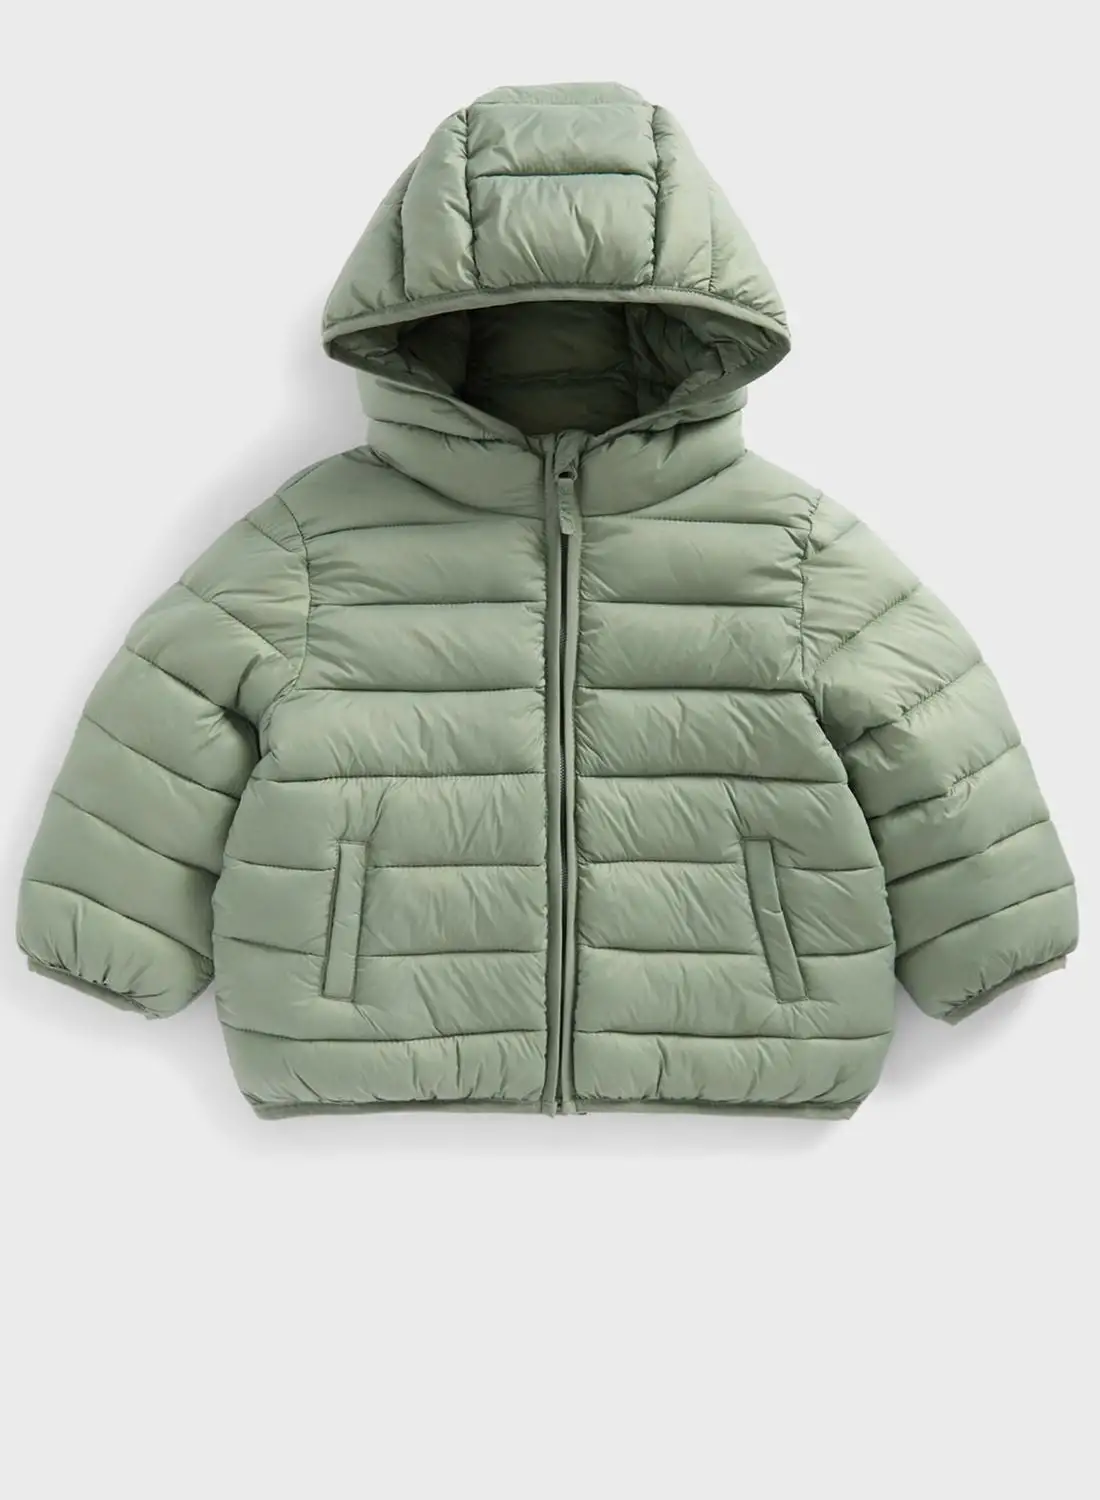 mothercare Youth Packaway Jacket